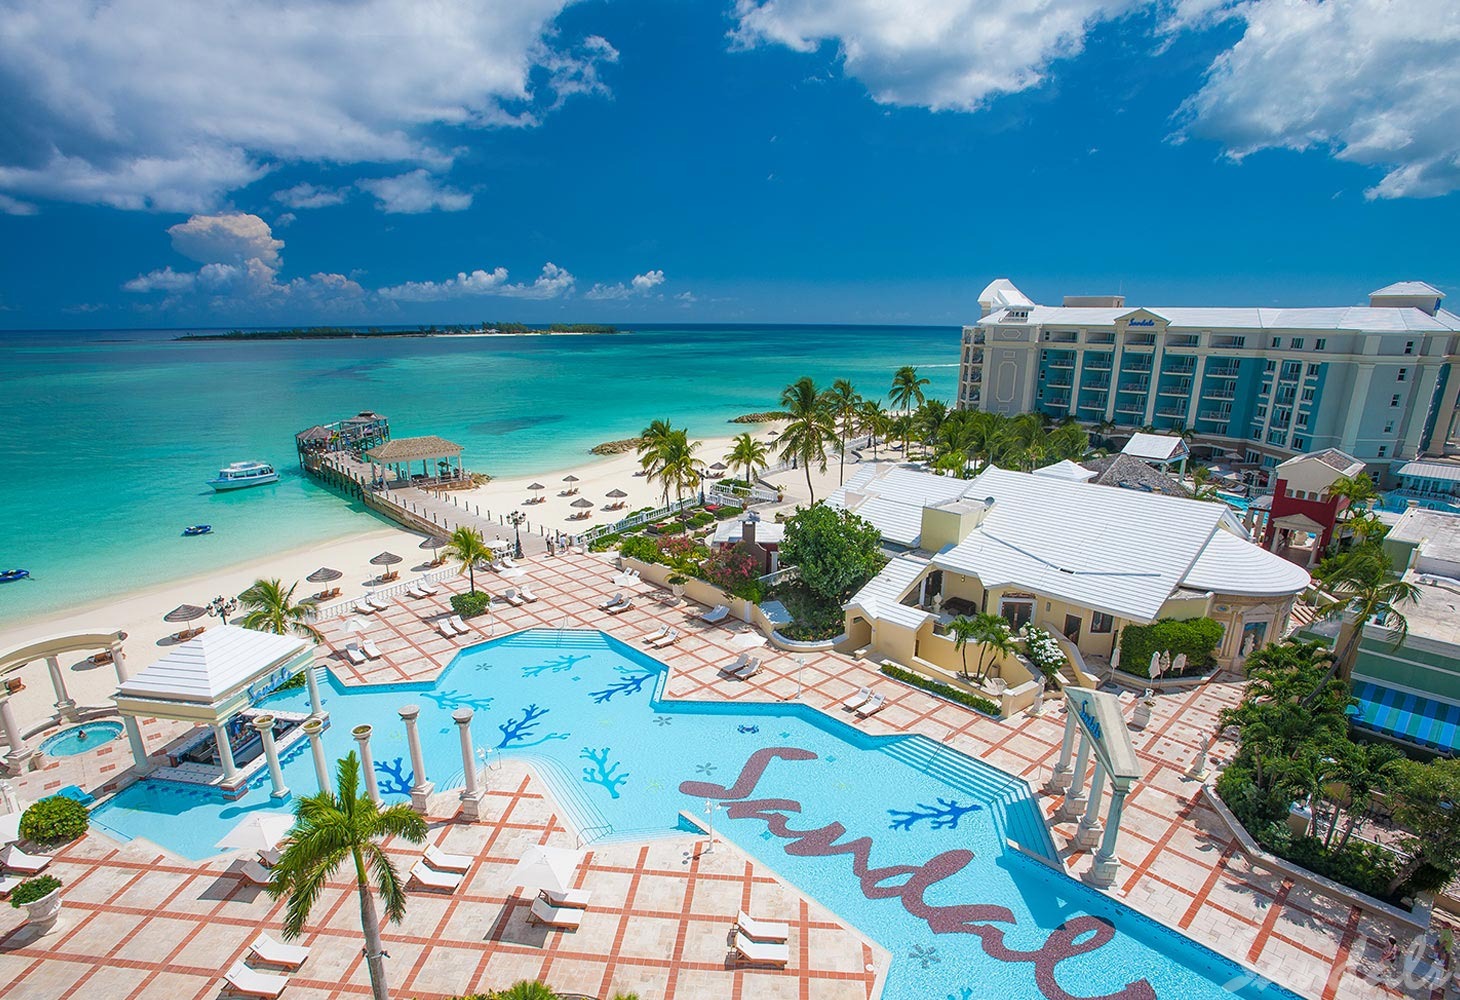 Sandals Resorts Bets Big on Luxury With $8,000-a-Night Rooms